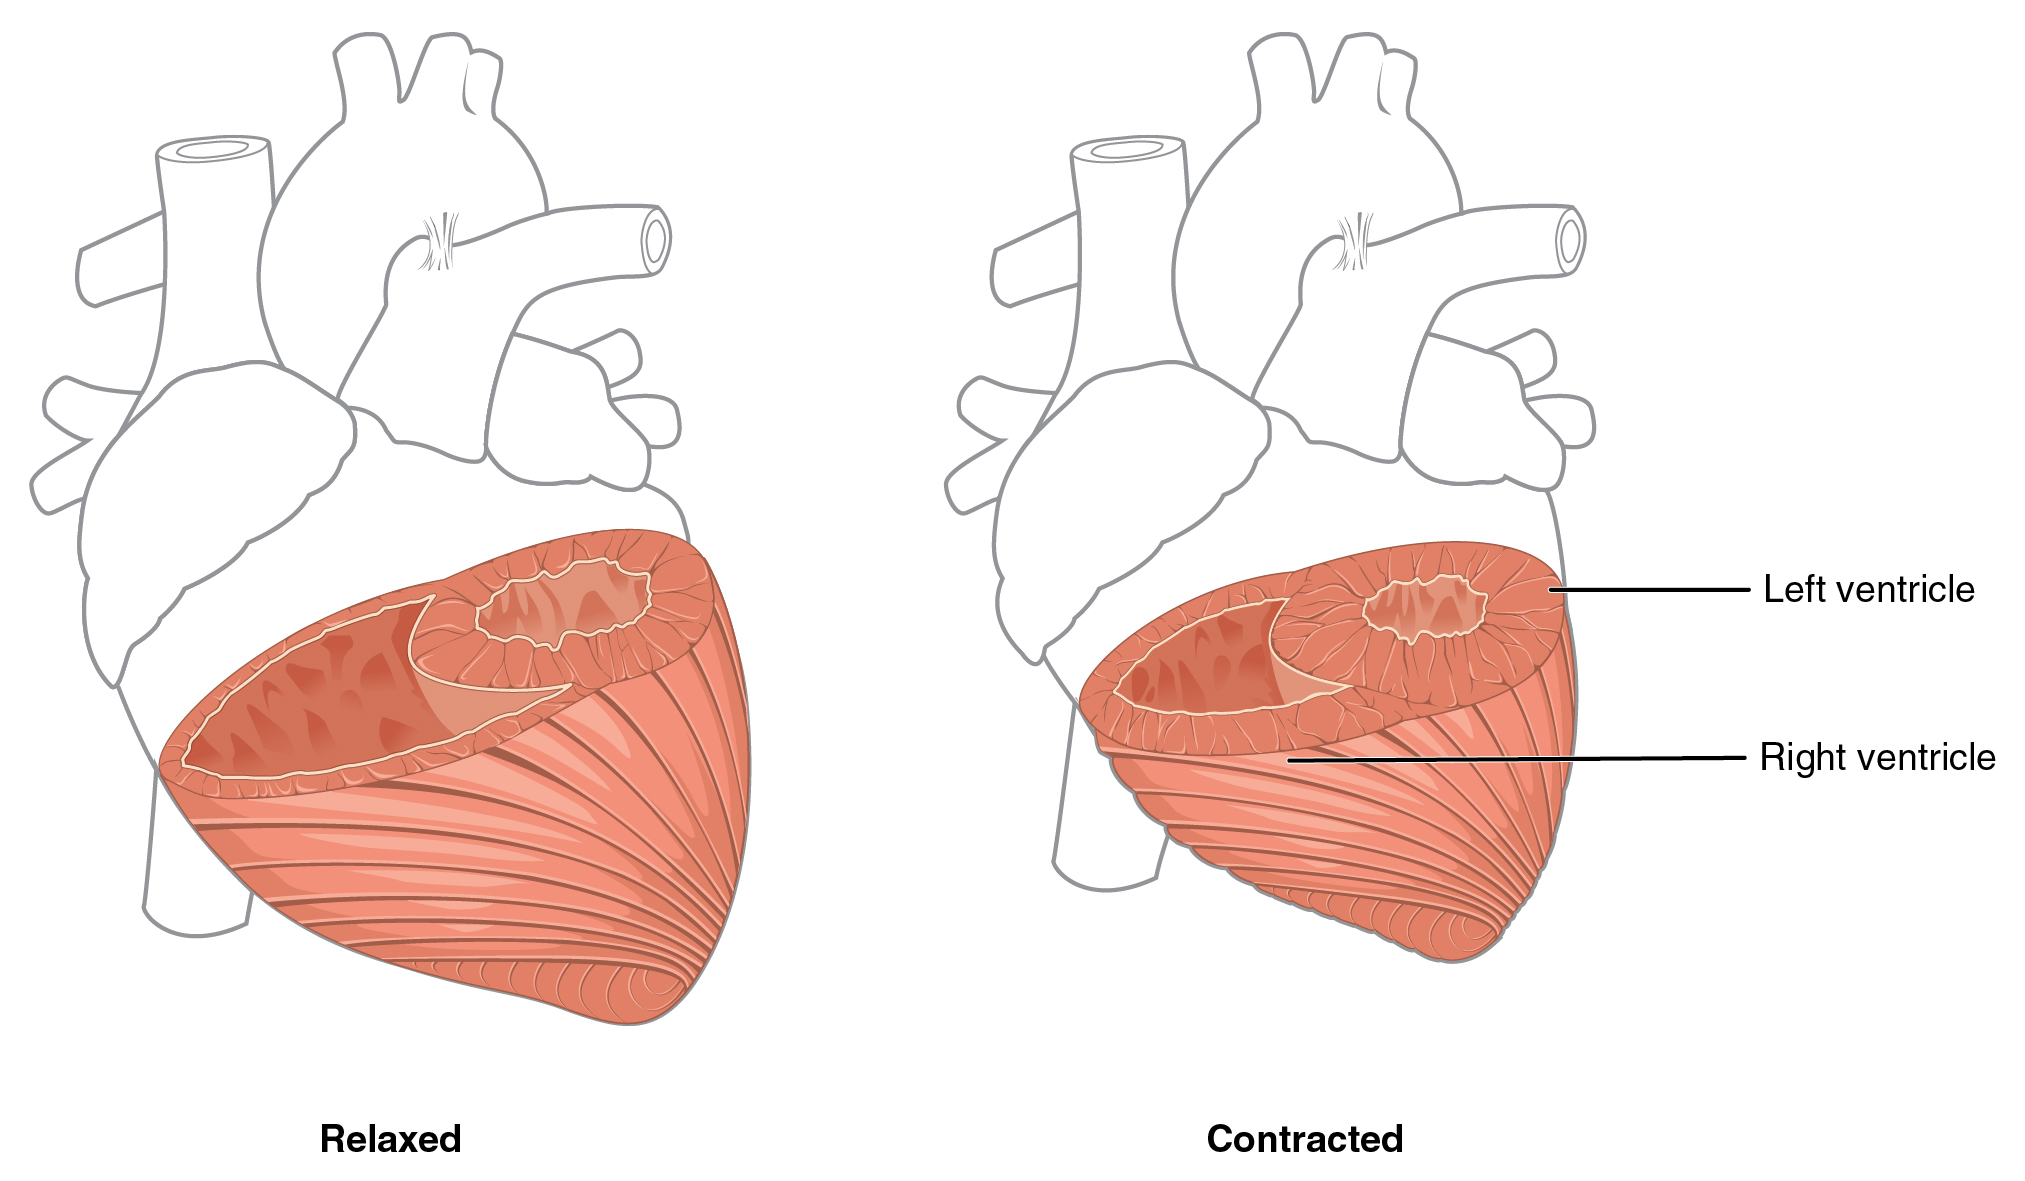 In this figure the left panel shows the muscles of the heart in the relaxed position, and the right panel shows the muscles of the heart in contracted position.